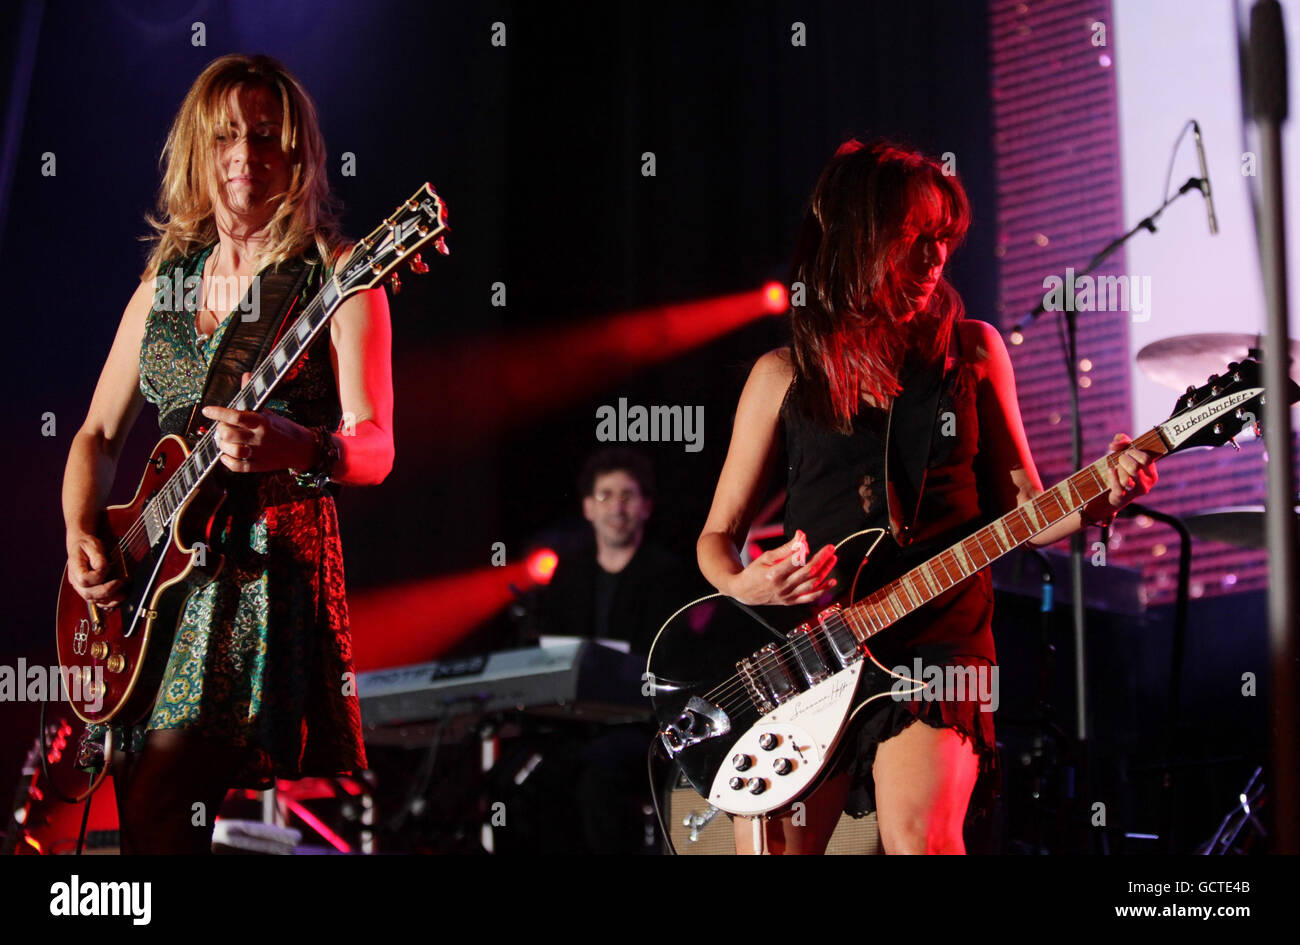 Susanna Hoffs (right) and Vicki Peterson of The Bangles performing during the PINKTOBER charity concert, at the Indigo2 at the O2 Arena in east London. Stock Photo